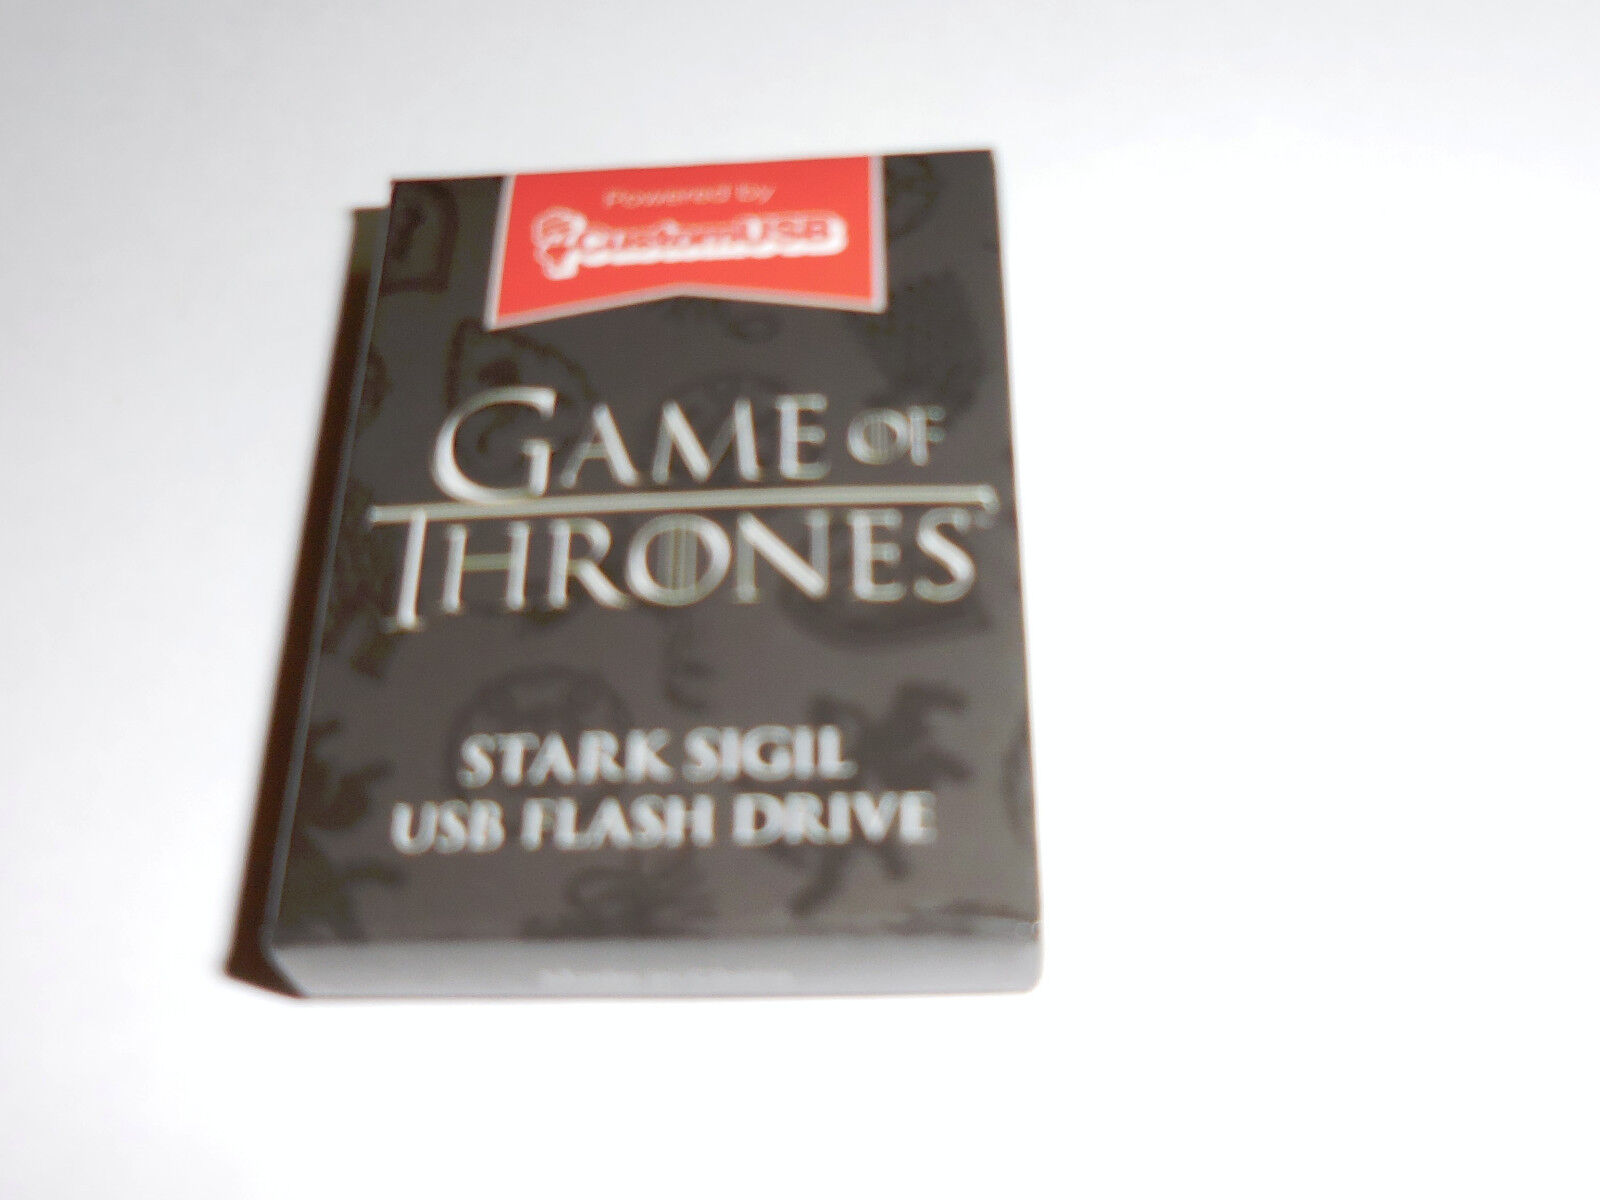 Game of Thrones Stark Sigil USB 4GB Flash Drive Loot Crate Exclusive April 2015